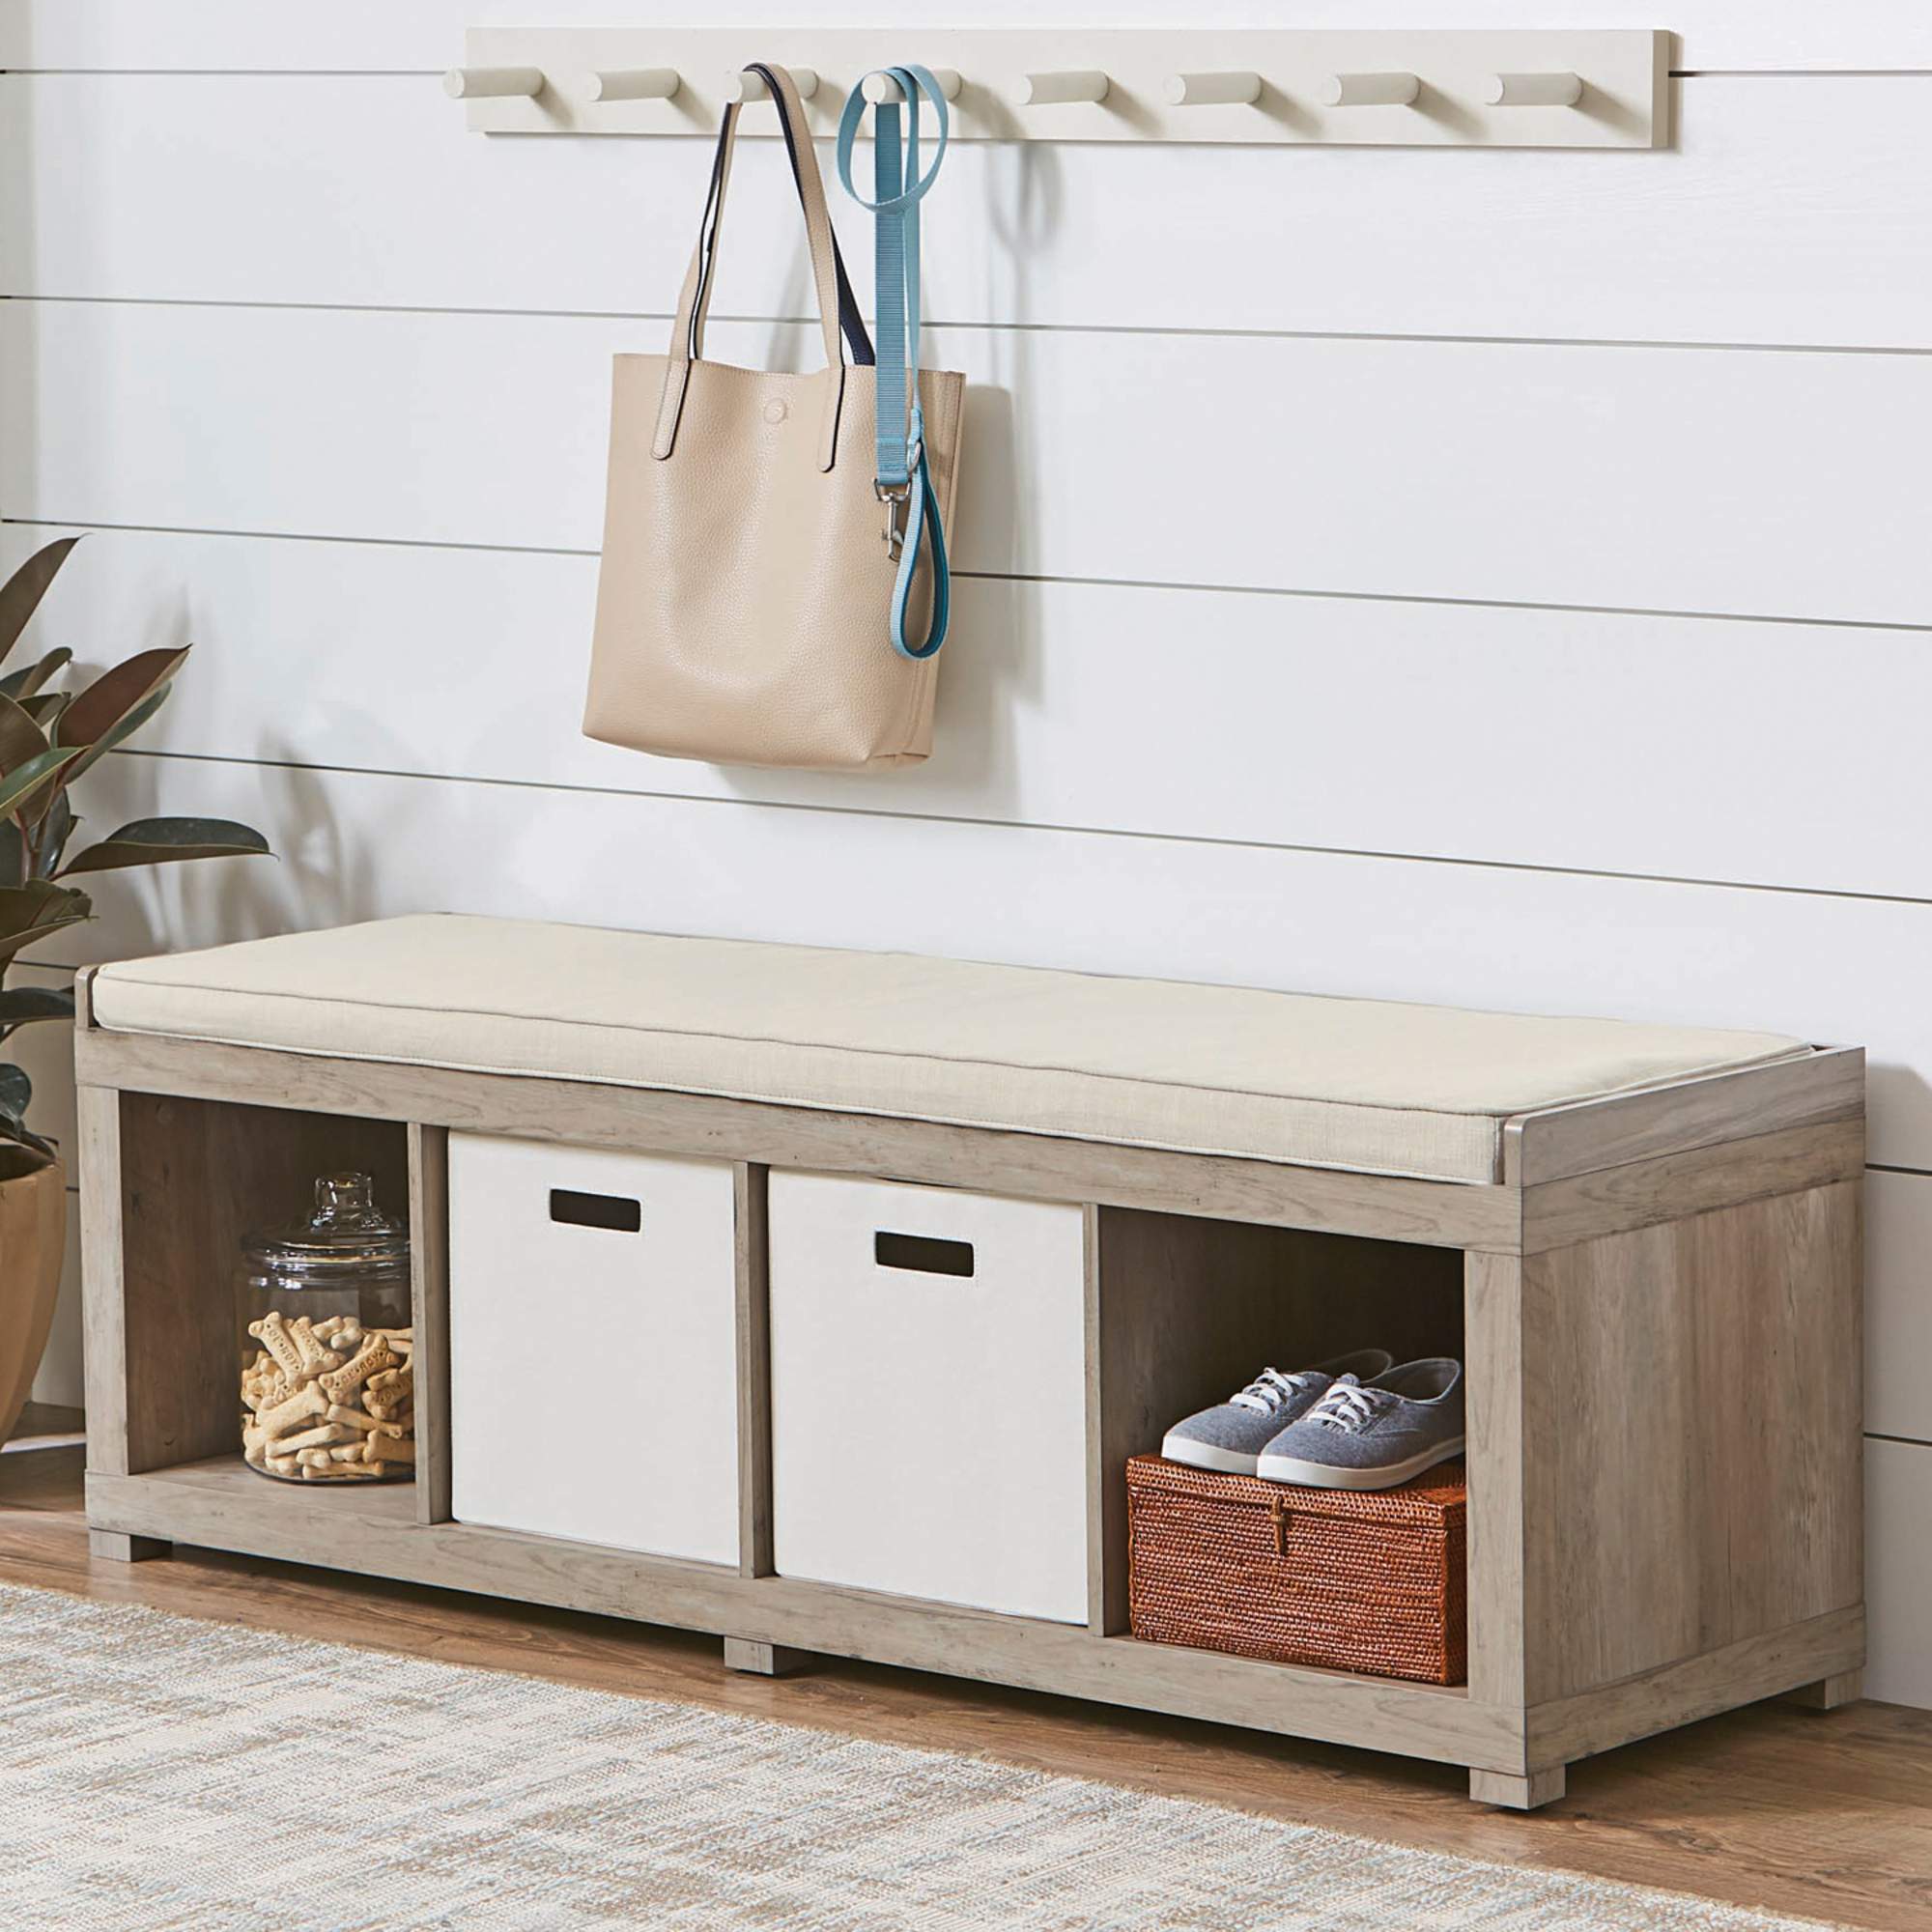 Better Homes & Gardens 4-Cube Shoe Storage Bench, Rustic Gray - image 1 of 7